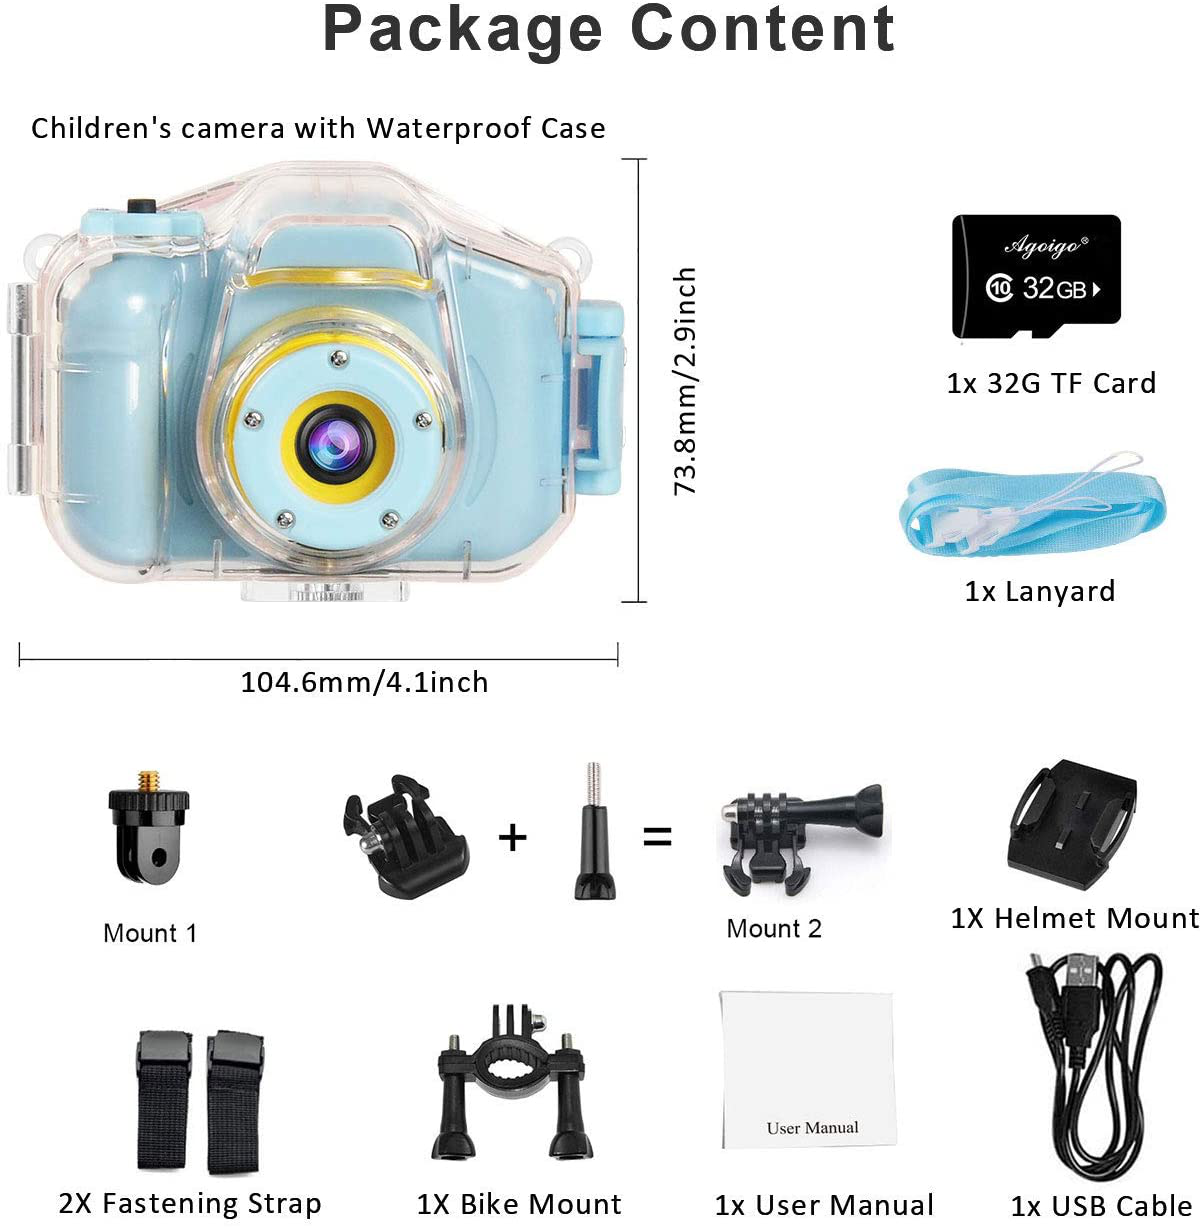 Agoigo Kids Waterproof Camera Toys for 3-12 Year Old Underwater Sports Camera HD Children Digital Action Camera 2 Inch Screen with 32GB Card